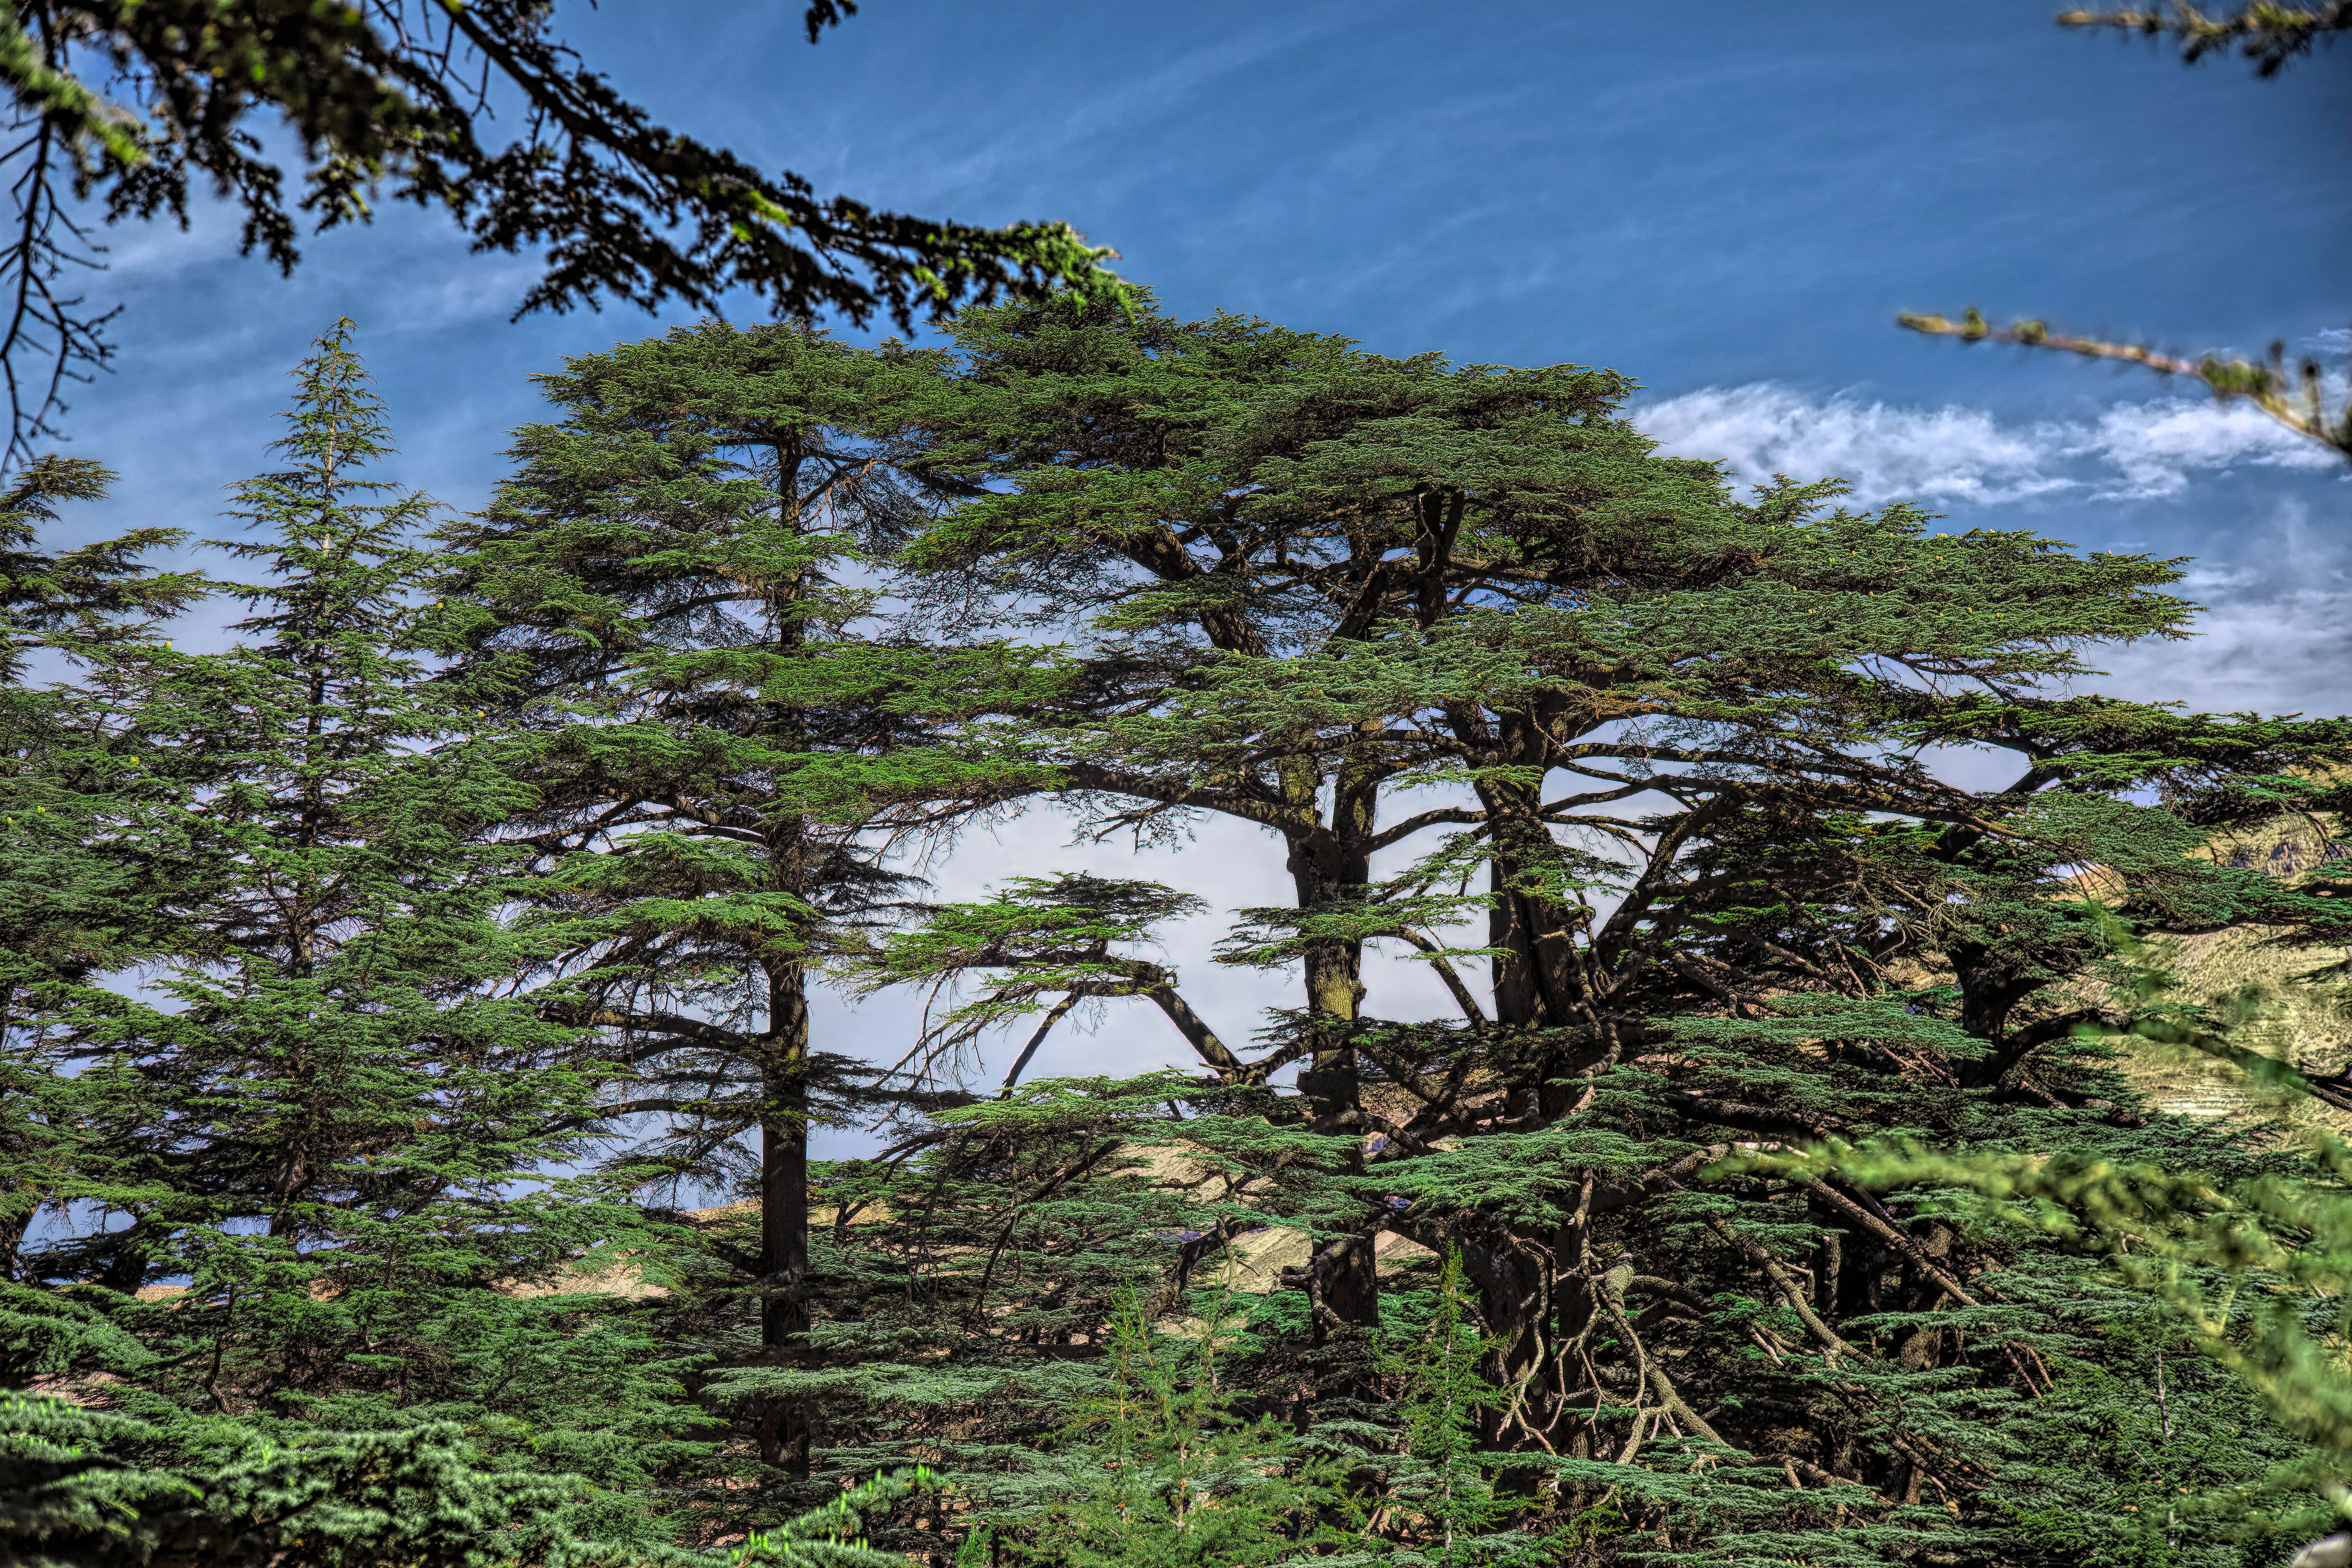 The Cedars of God in Lebanon, Middle East | Nature Reserves,Trekking & Hiking - Rated 4.1